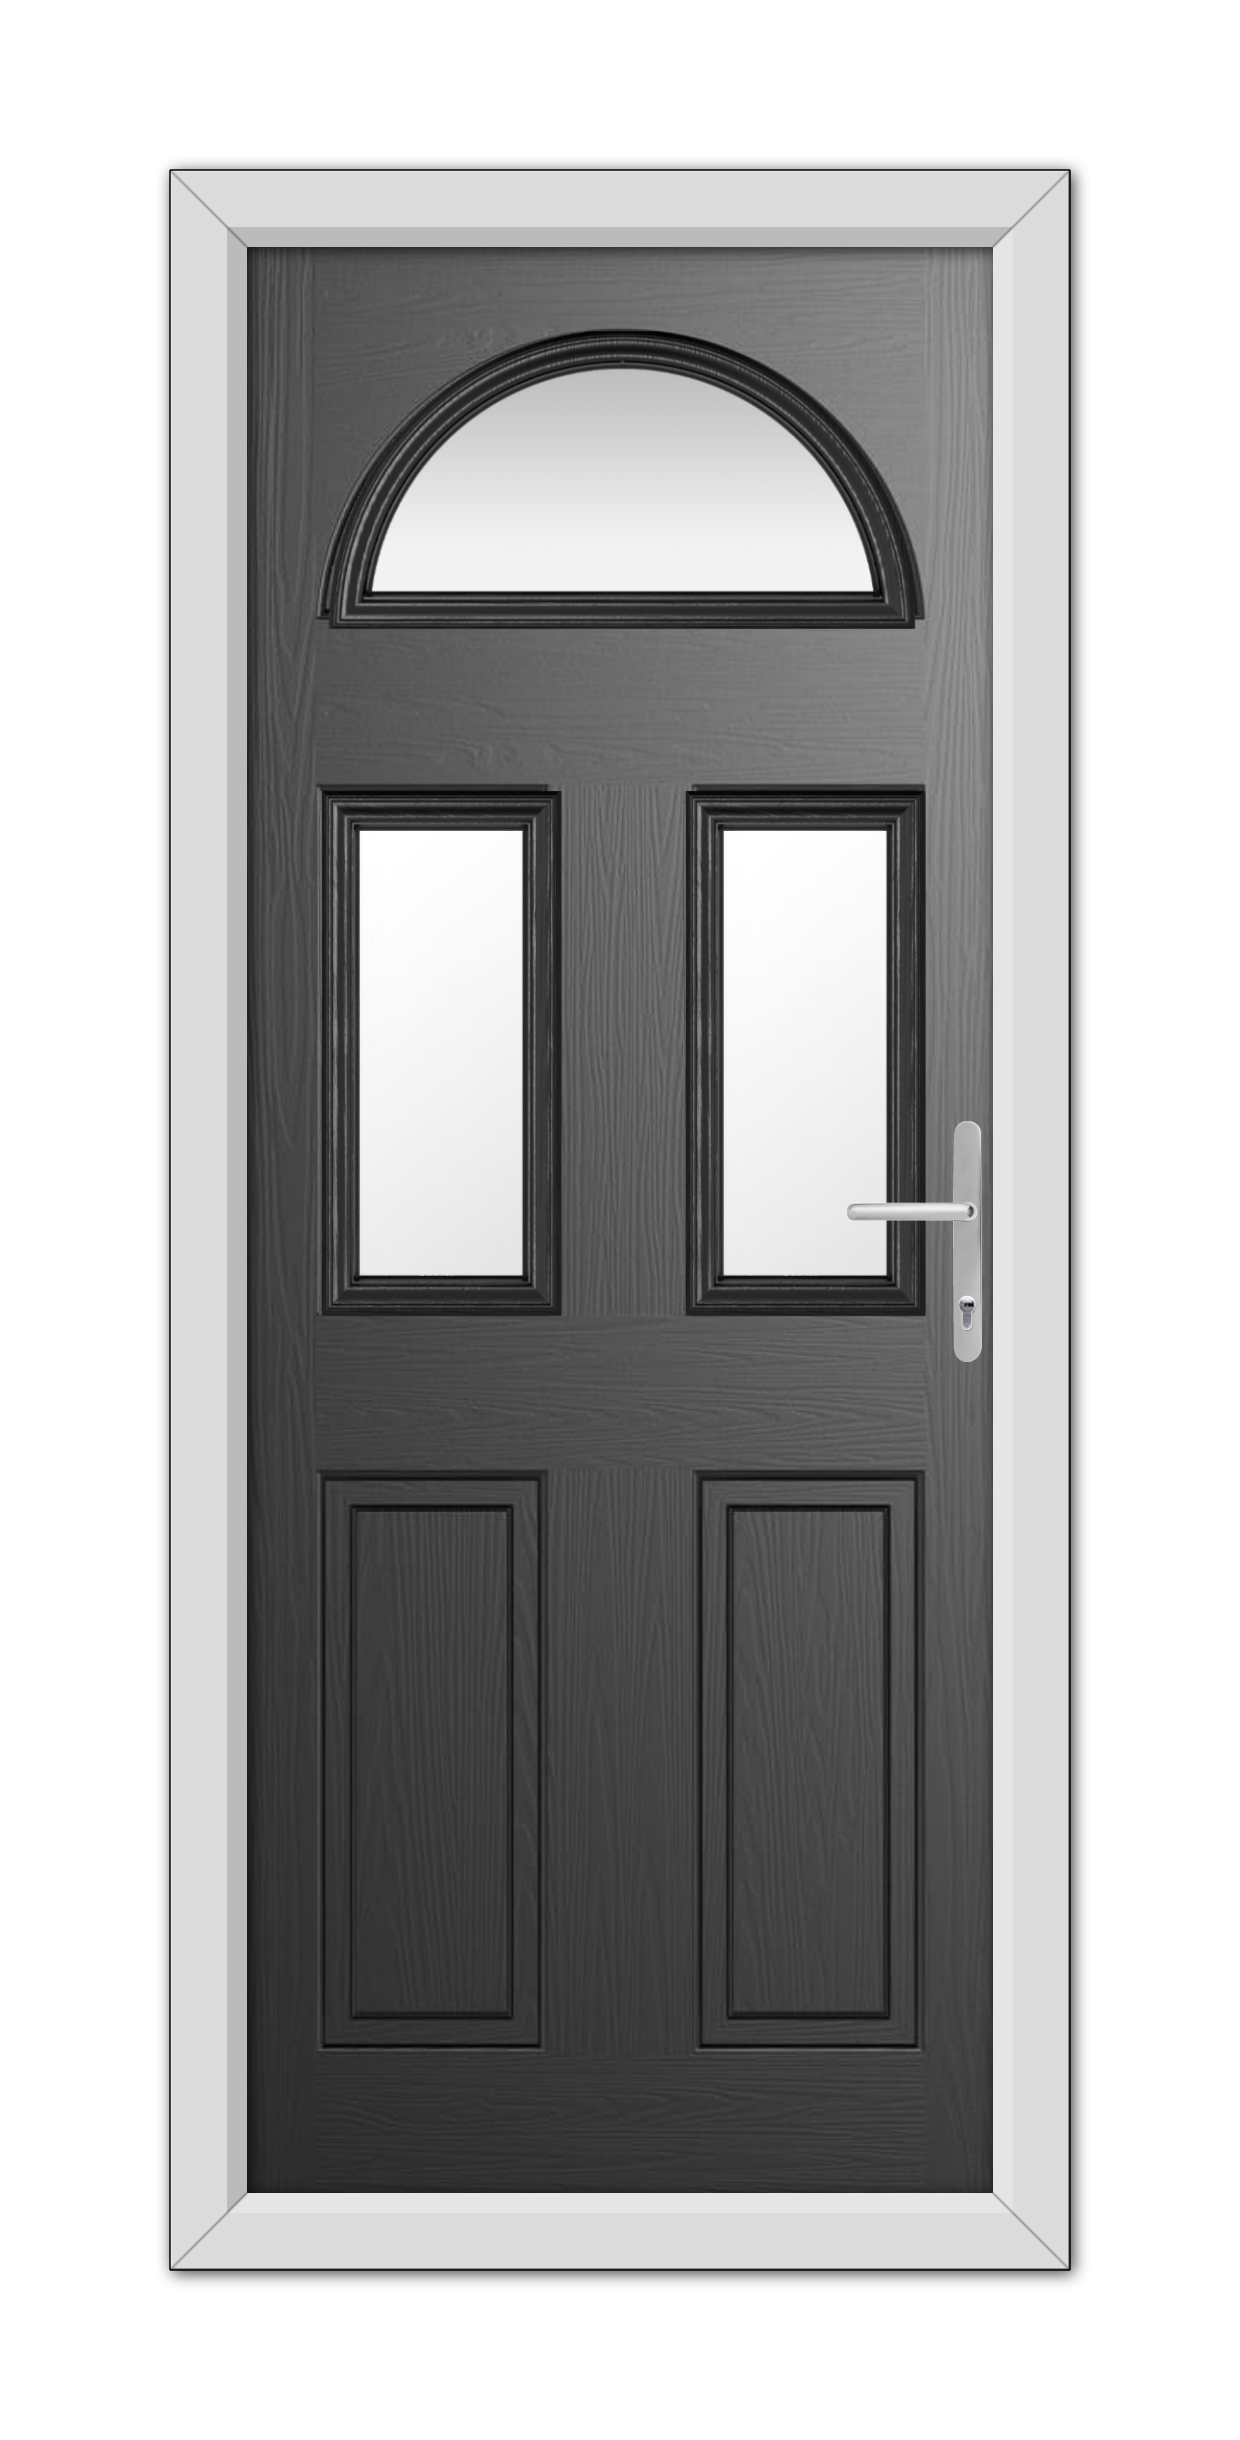 A modern Black Winslow 3 Composite Door 48mm Timber Core with a semicircular transom window and two vertical glass panels, set in a white frame with a metallic handle.